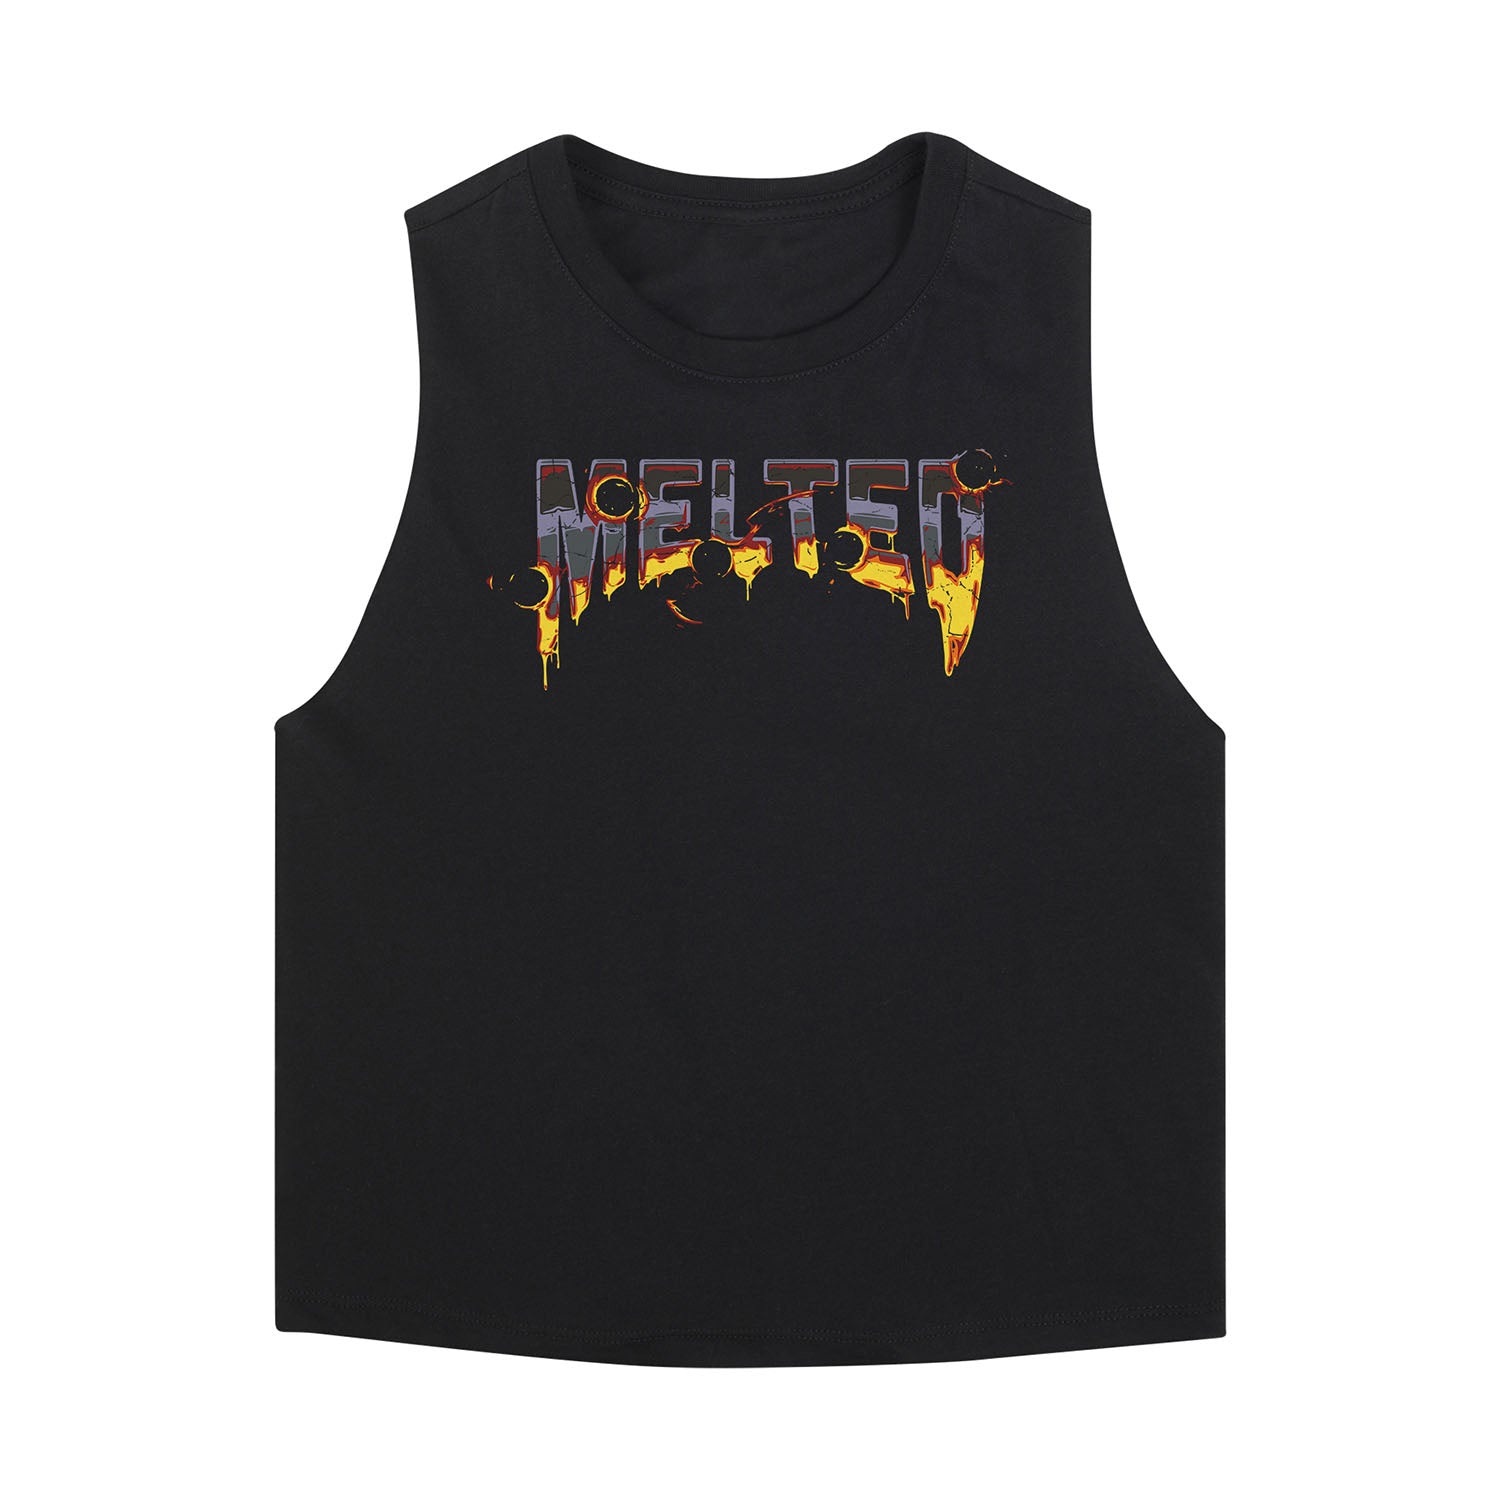 Call of Duty Melted Women's Black Cropped Tank Top - Front View